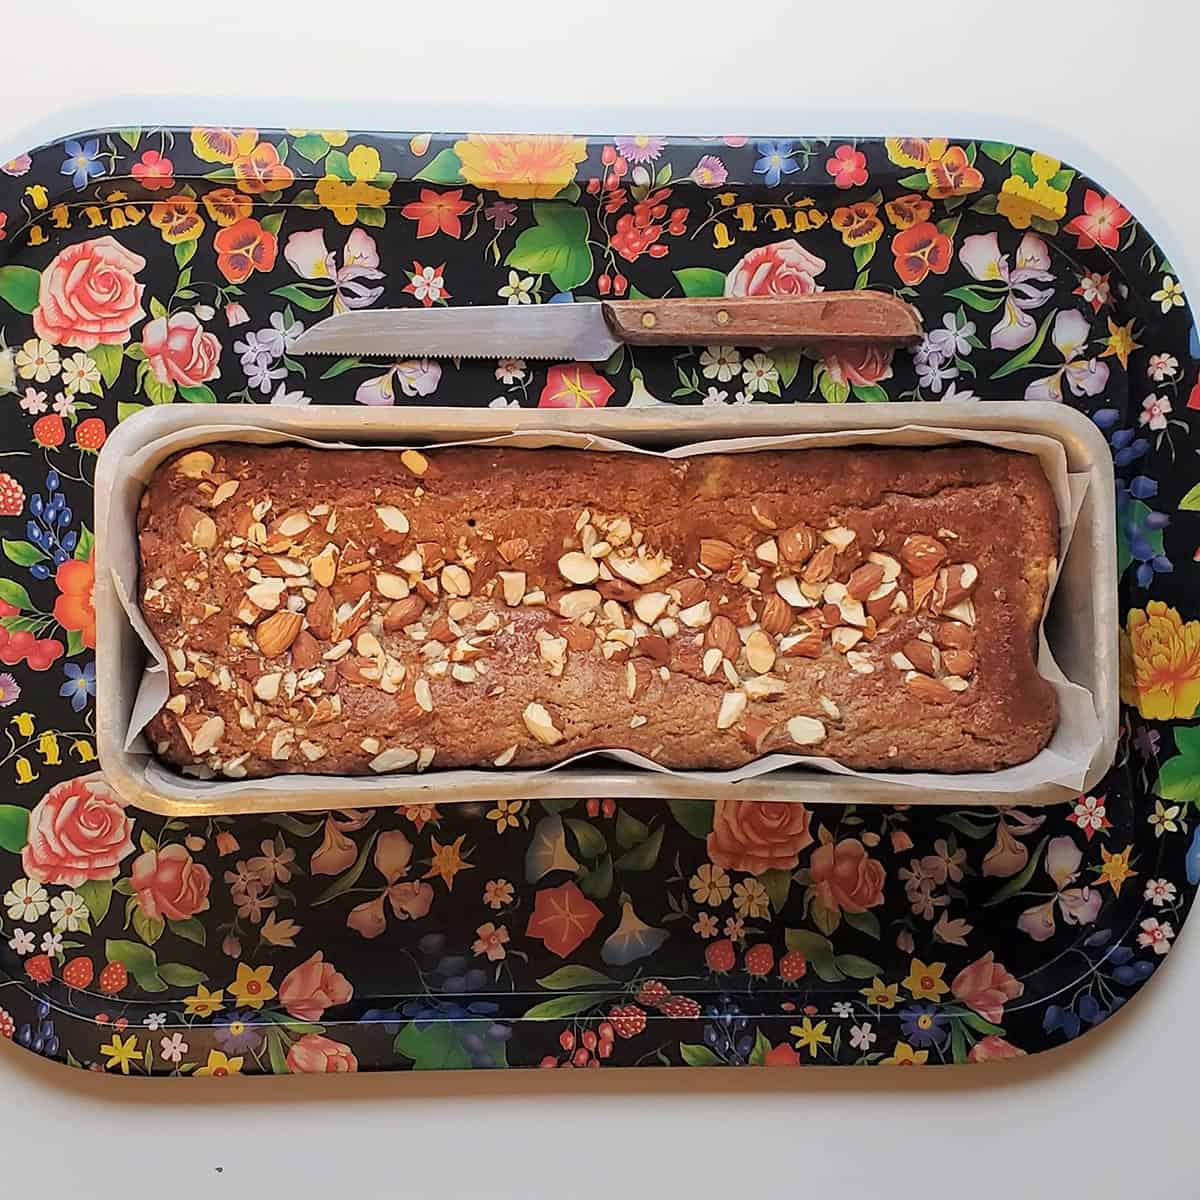 Pan of Banana Almond Cake on a Floral Tray